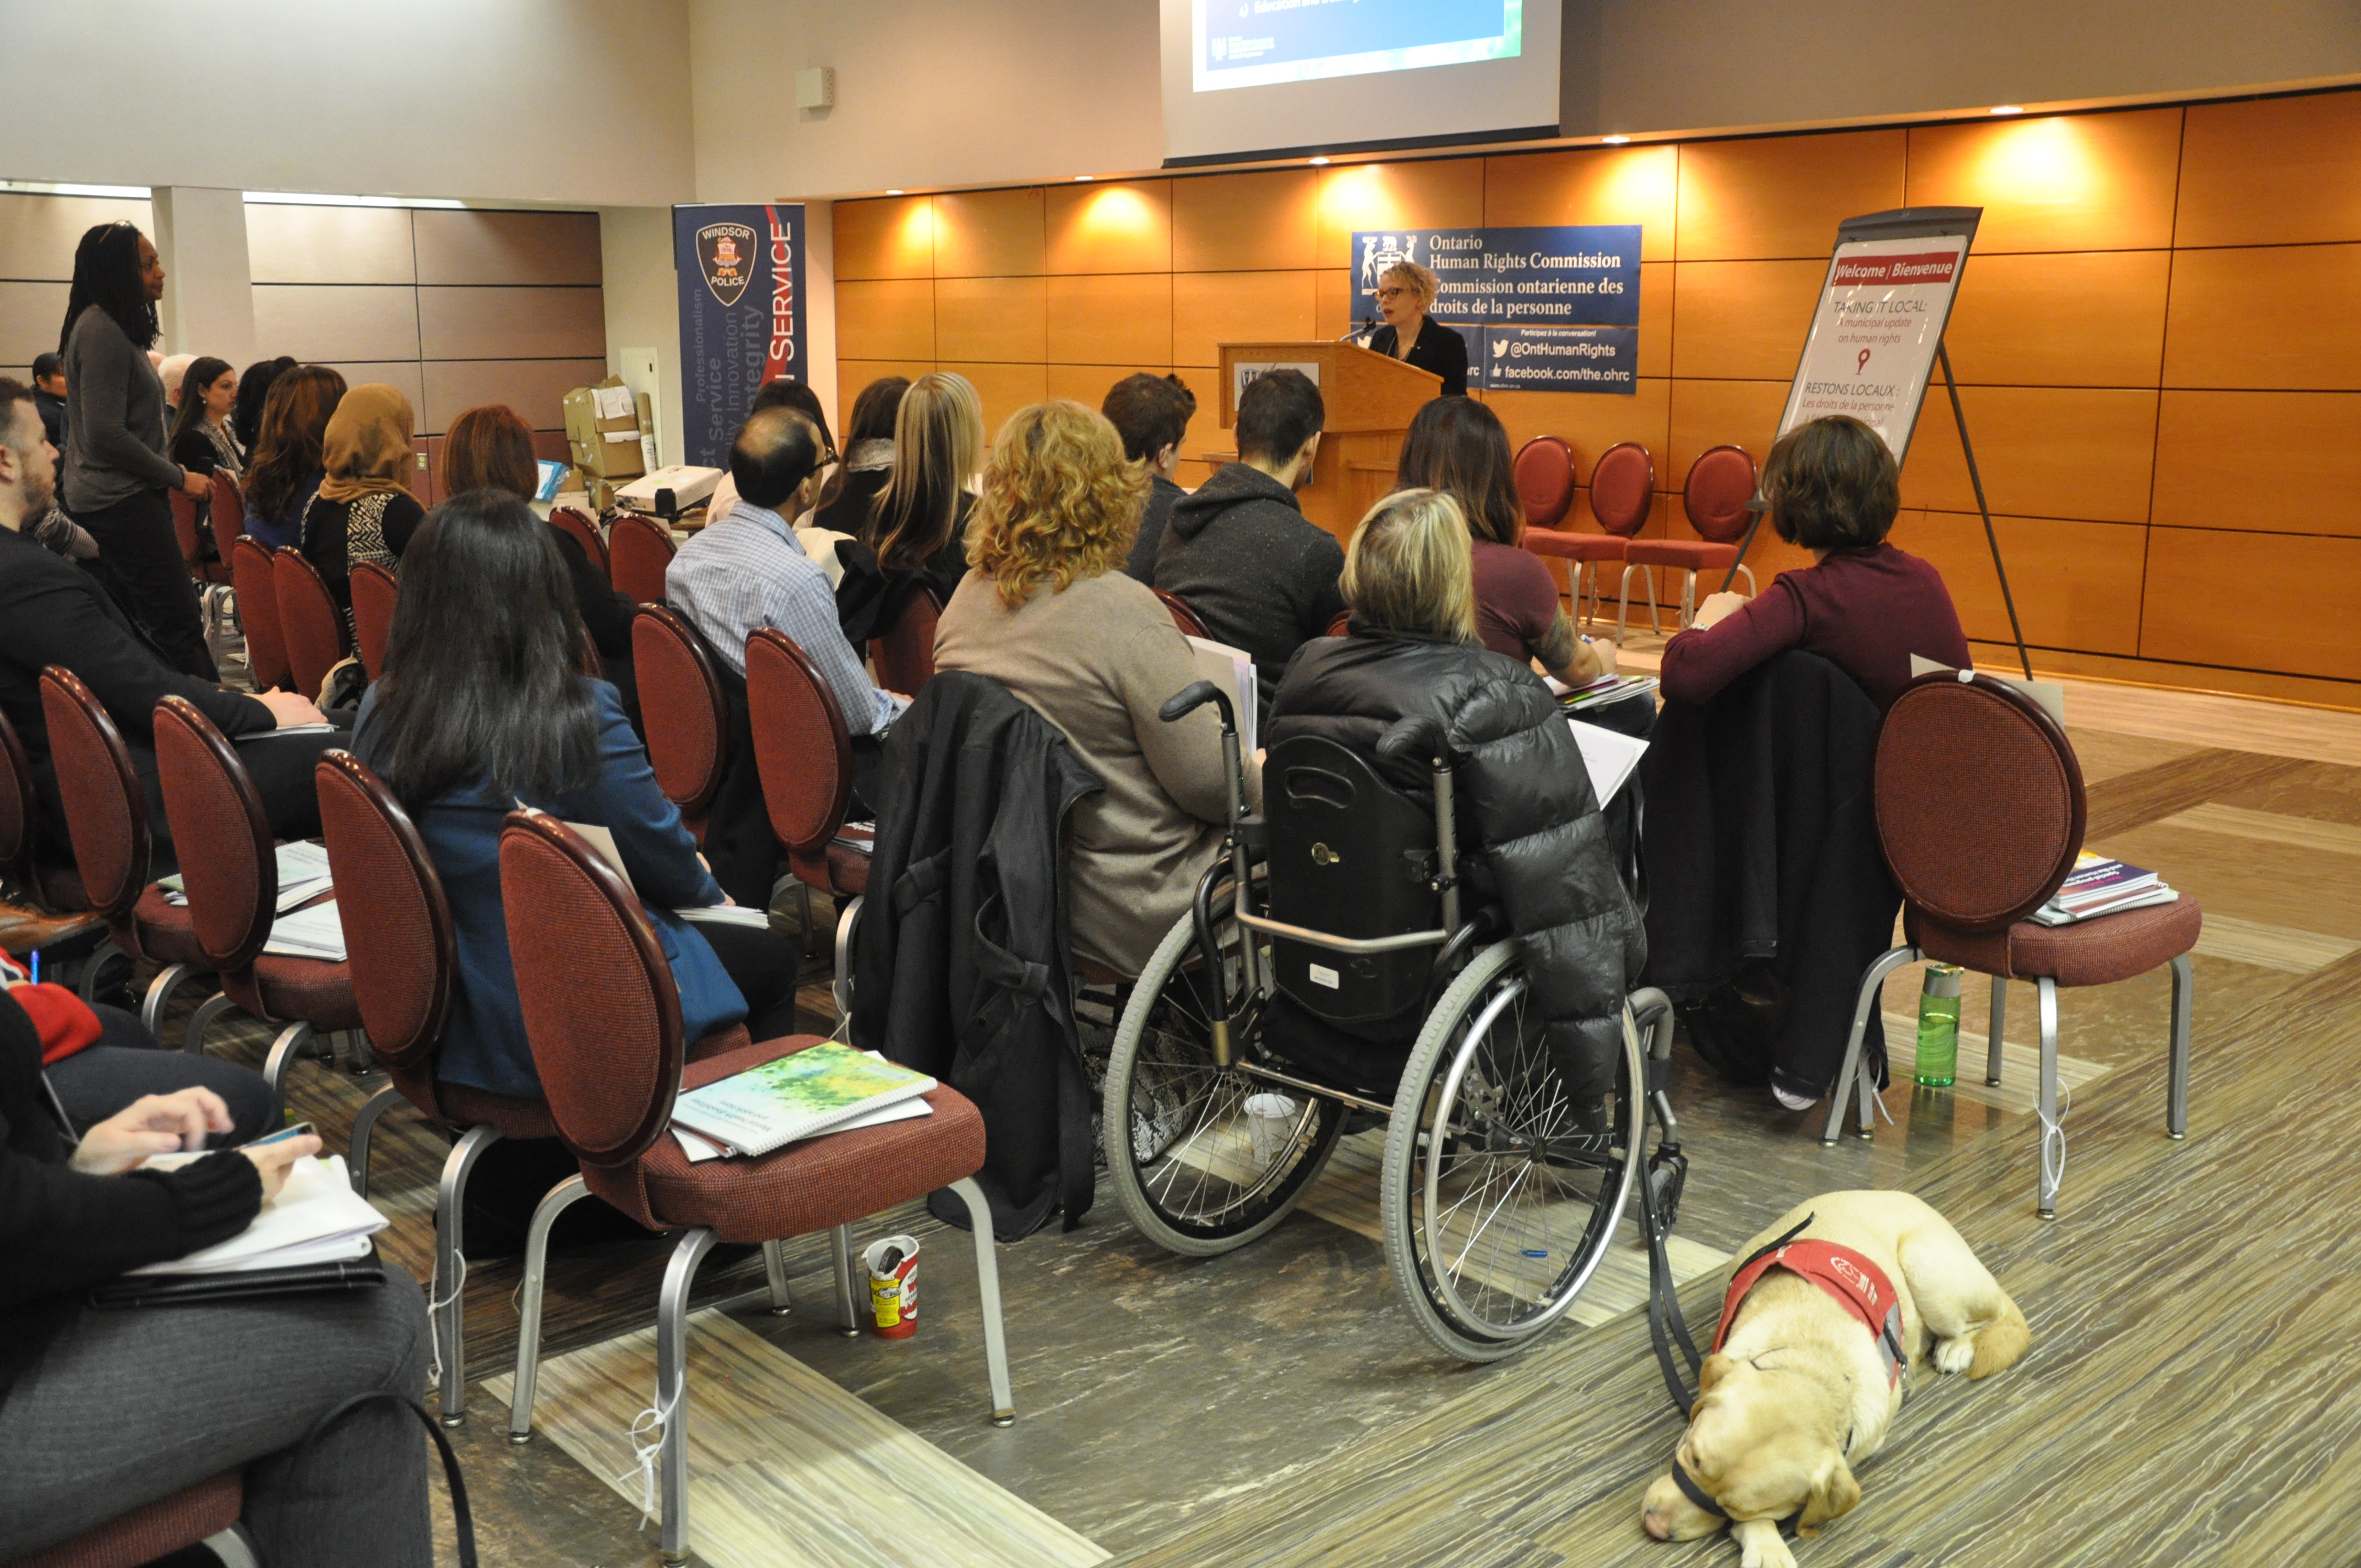 Senior Policy Analyst Cherie Robertson stands behind a podium presenting to a crowd of attendees. A woman in a wheelchair and her service dog appear in the foreground. 